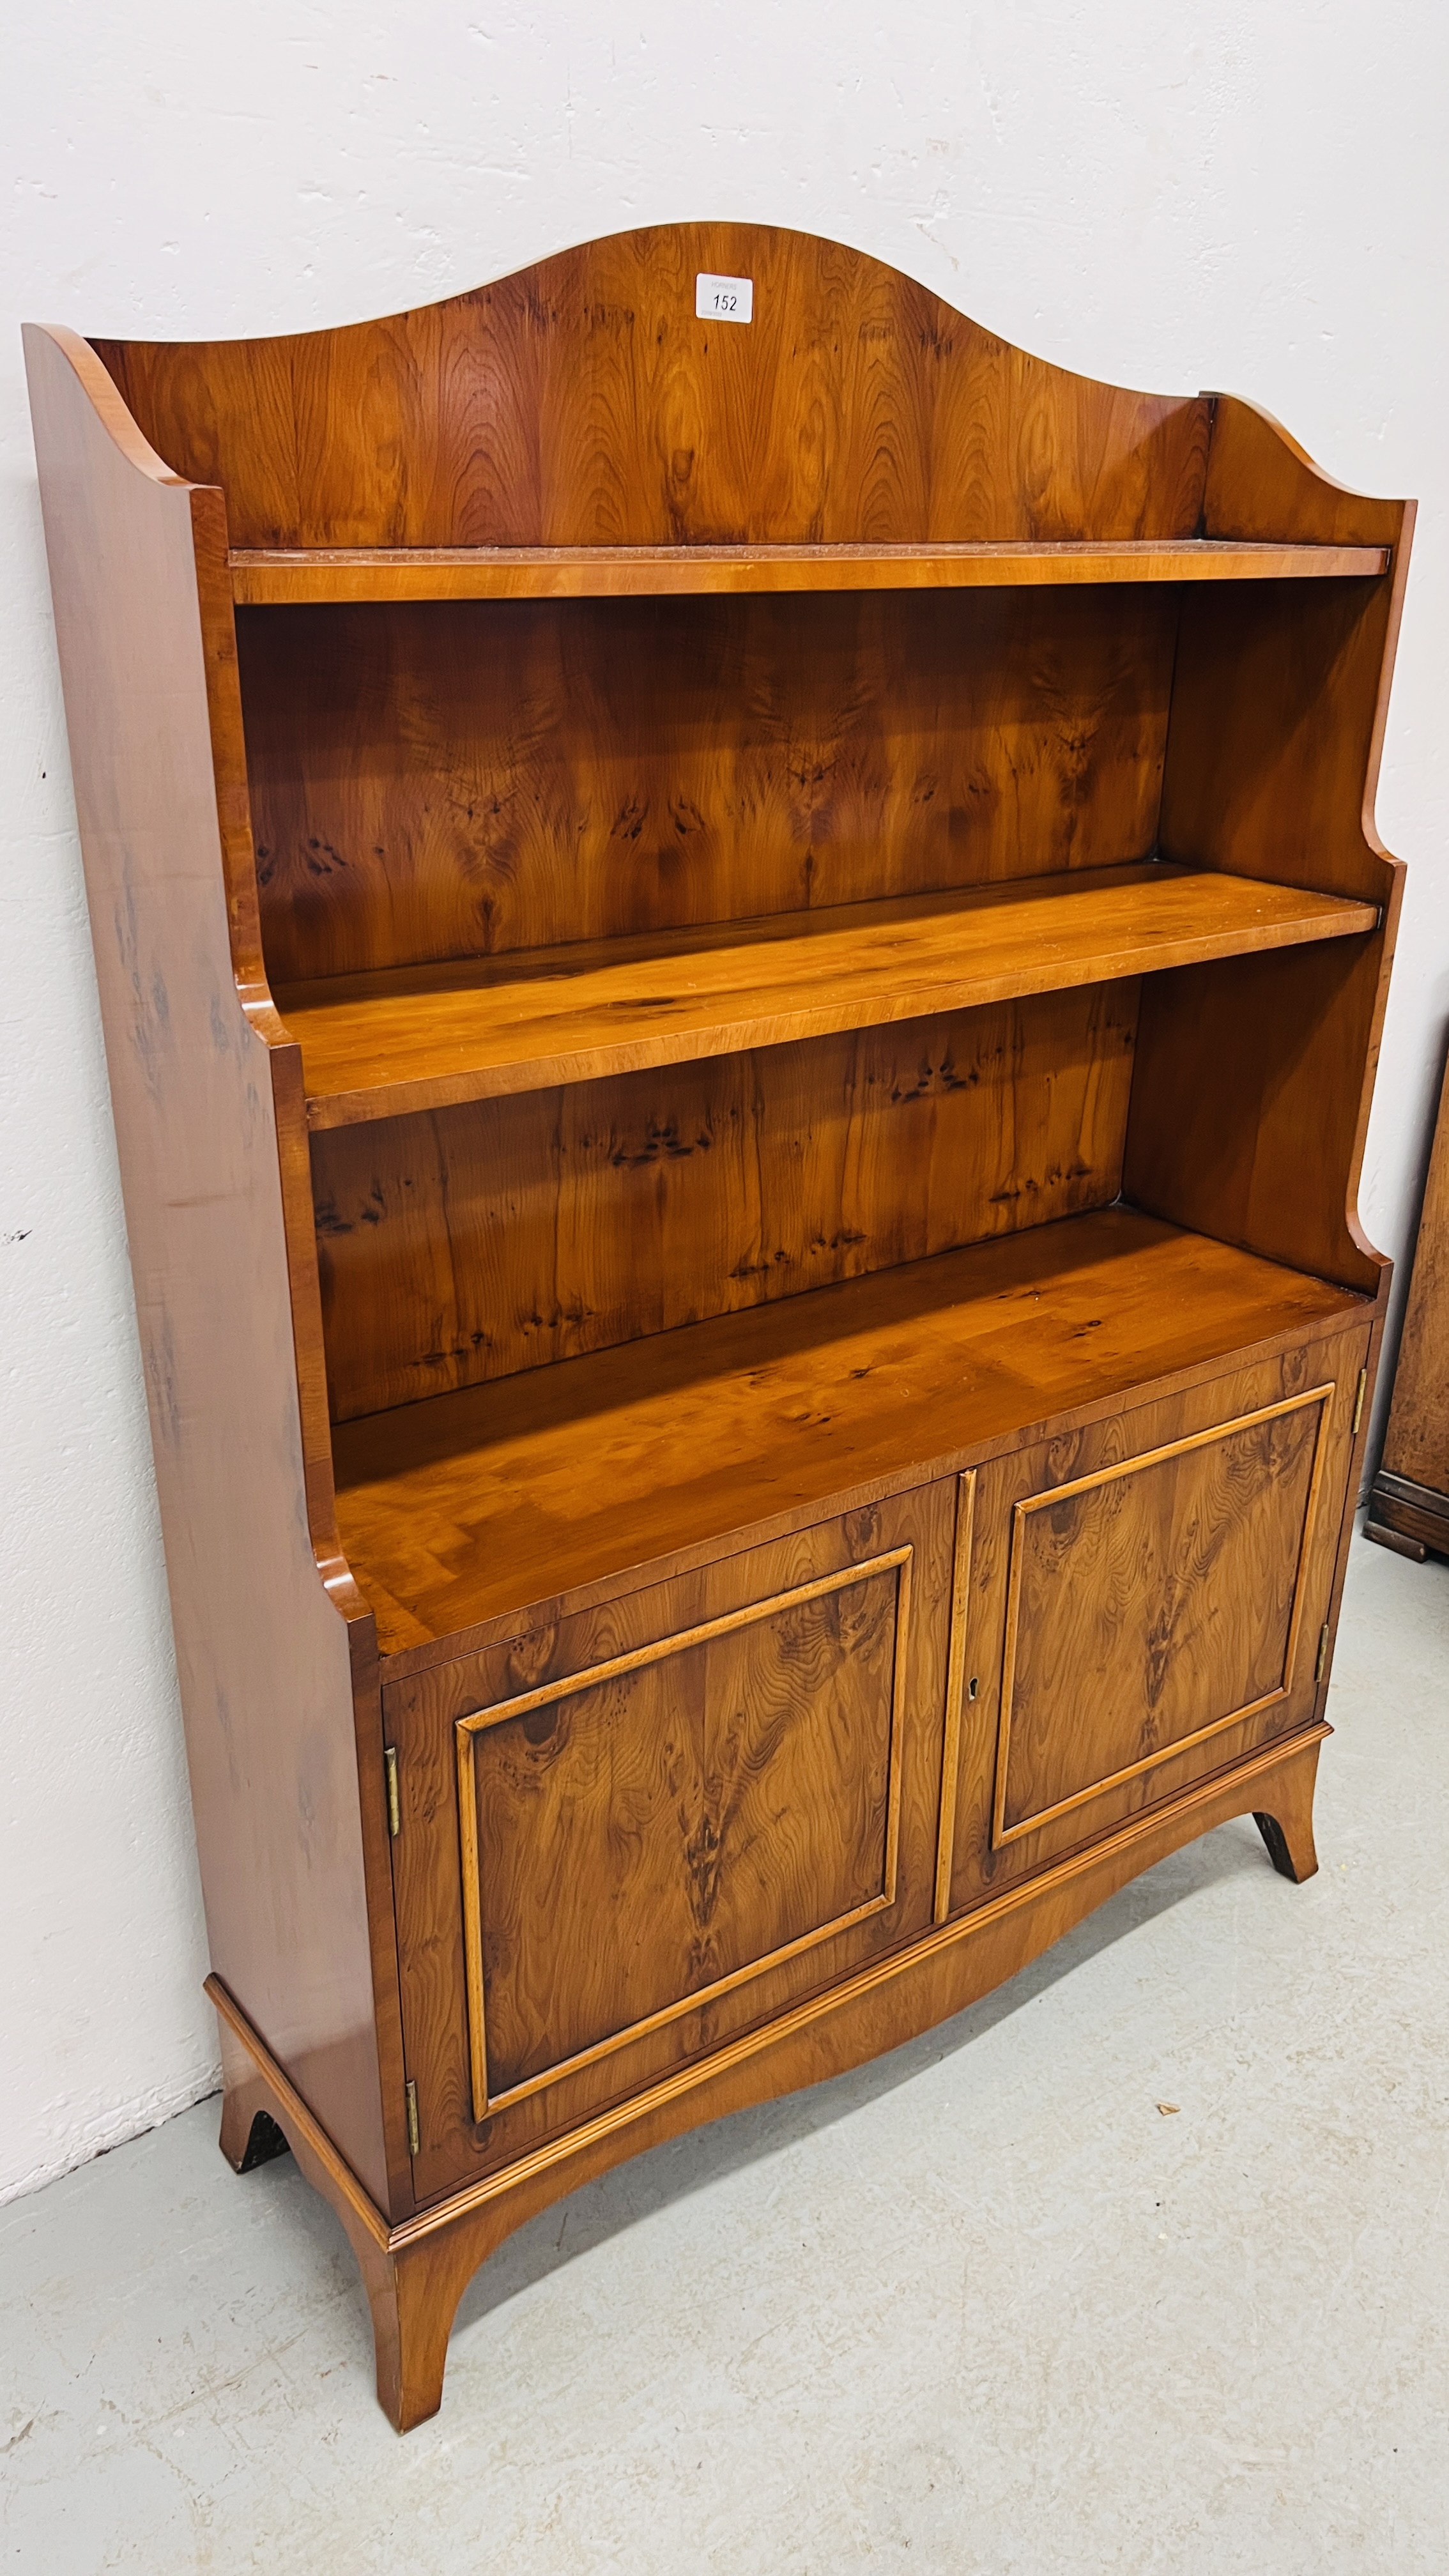 A GOOD QUALITY REPRODUCTION YEW WOOD FINISH BOOKSHELF WITH CABINET TO BASE WIDTH 85CM. DEPTH 27CM. - Image 5 of 5